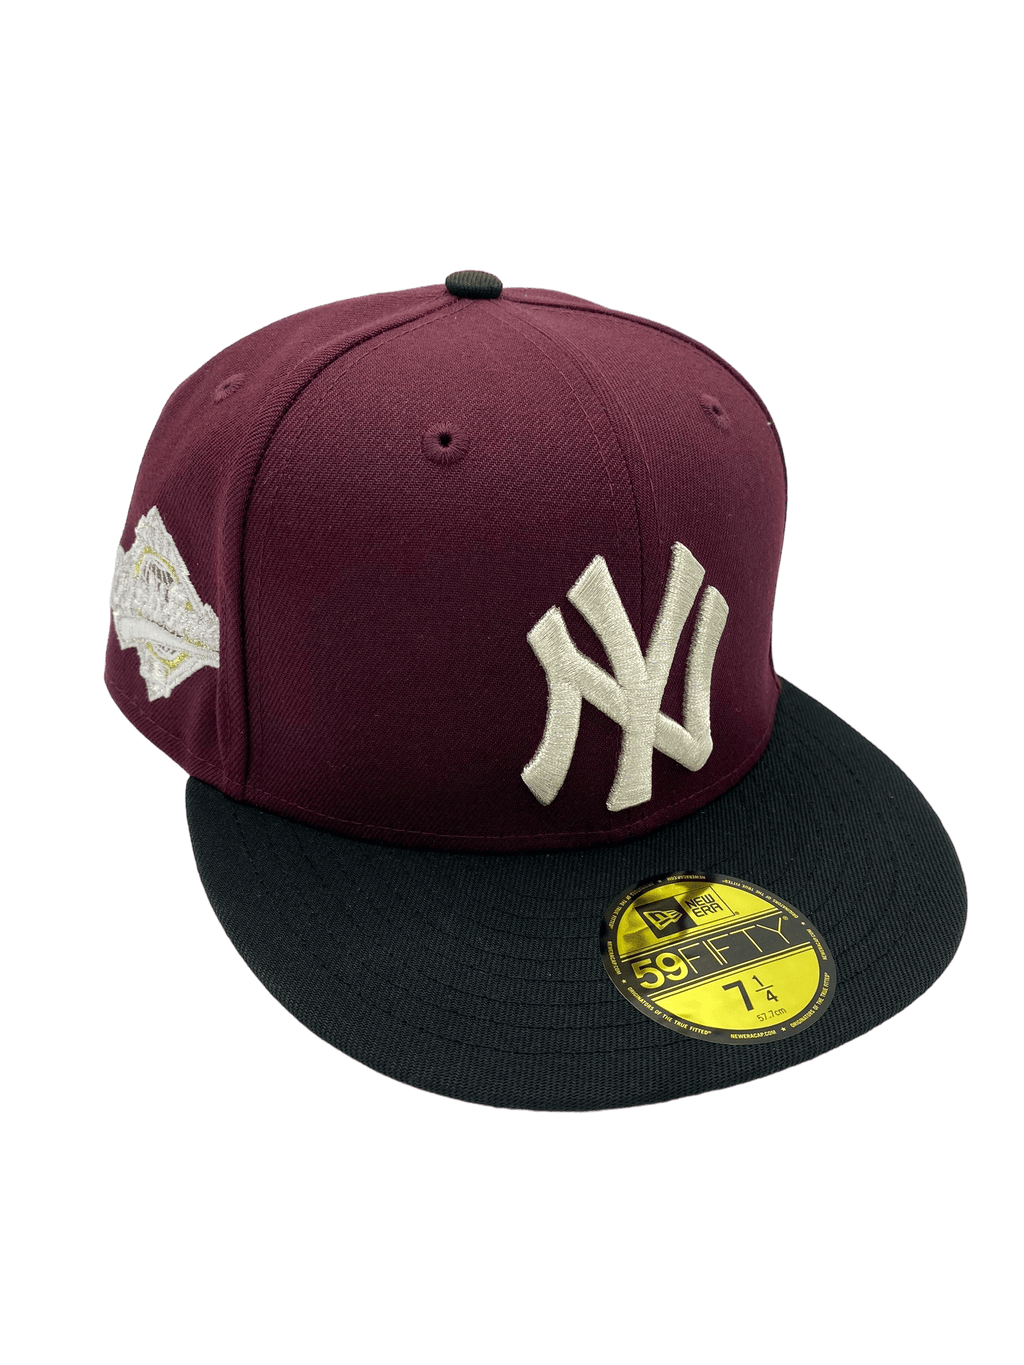 New York Yankees New Era MLB City Side Patch 59fifty Fitted Hat - Navy